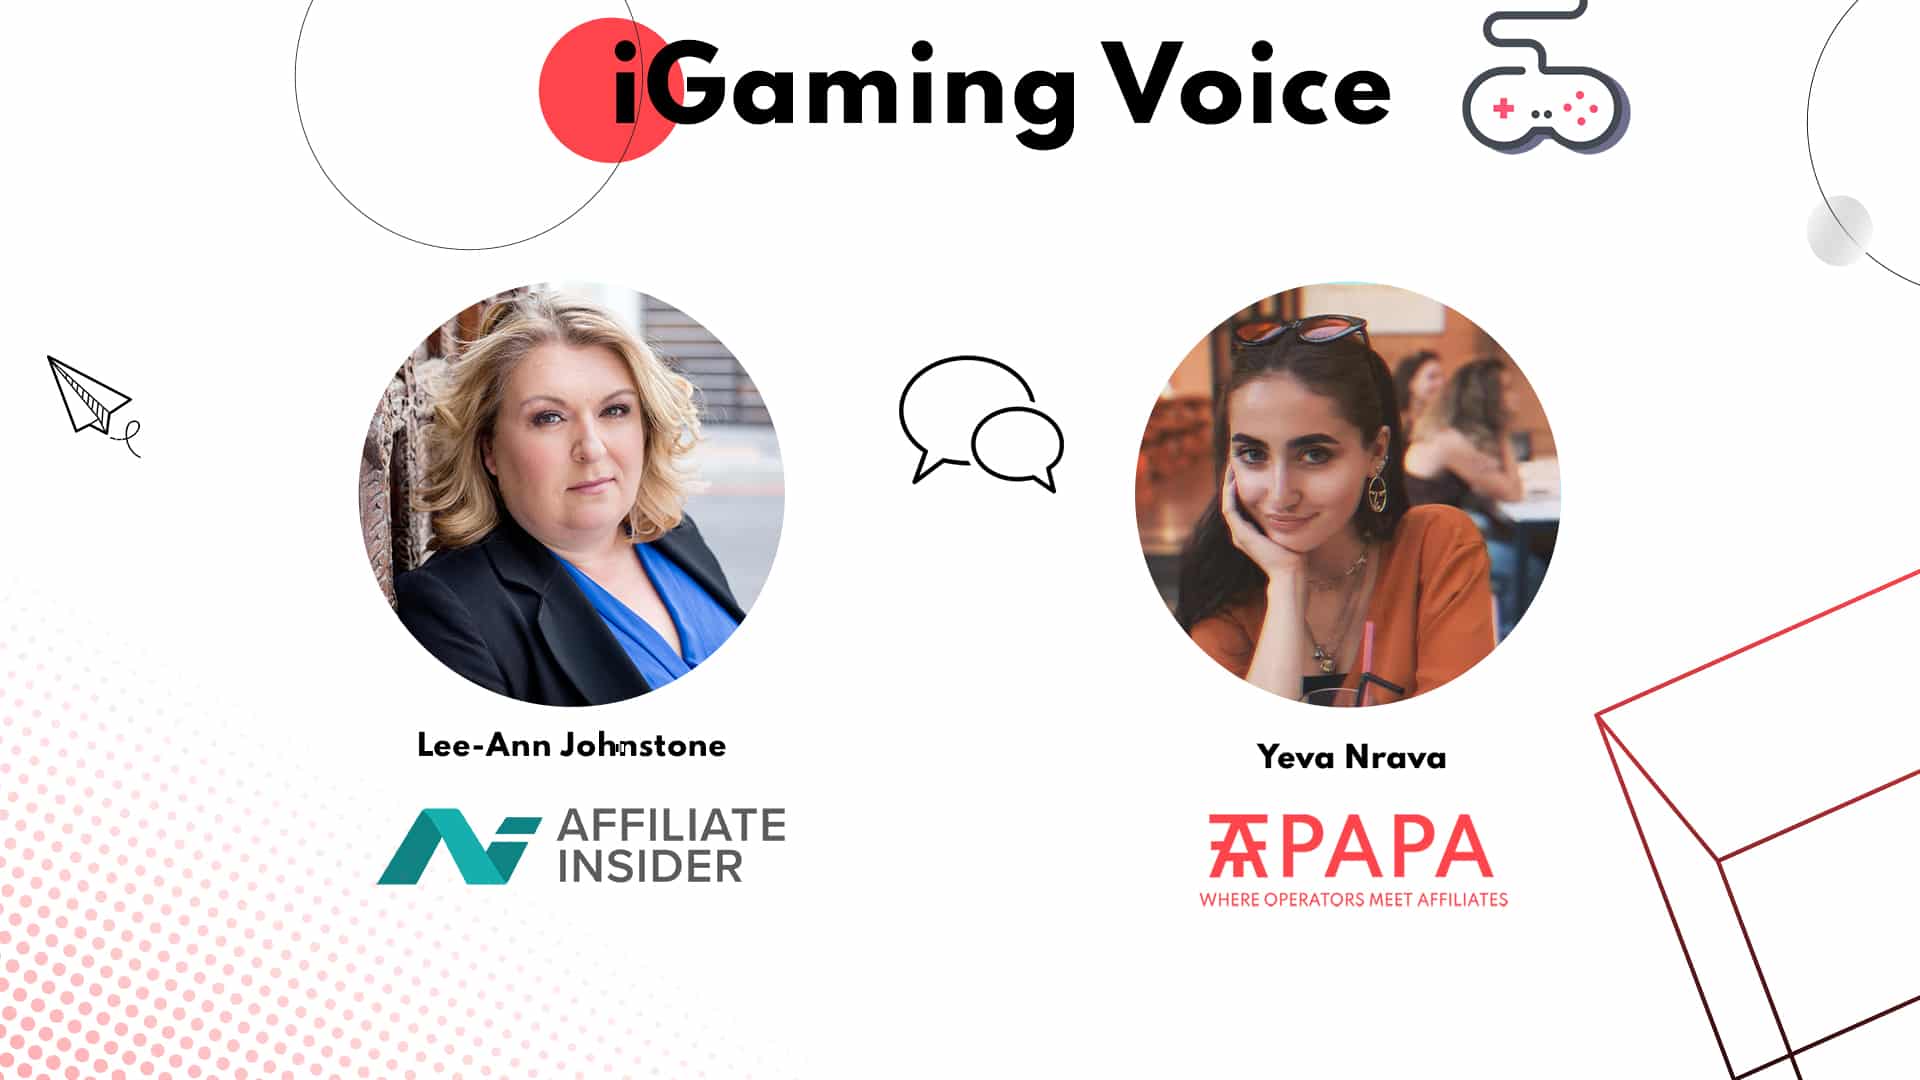 iGaming Voice by Yeva – Affiliate INSIDER